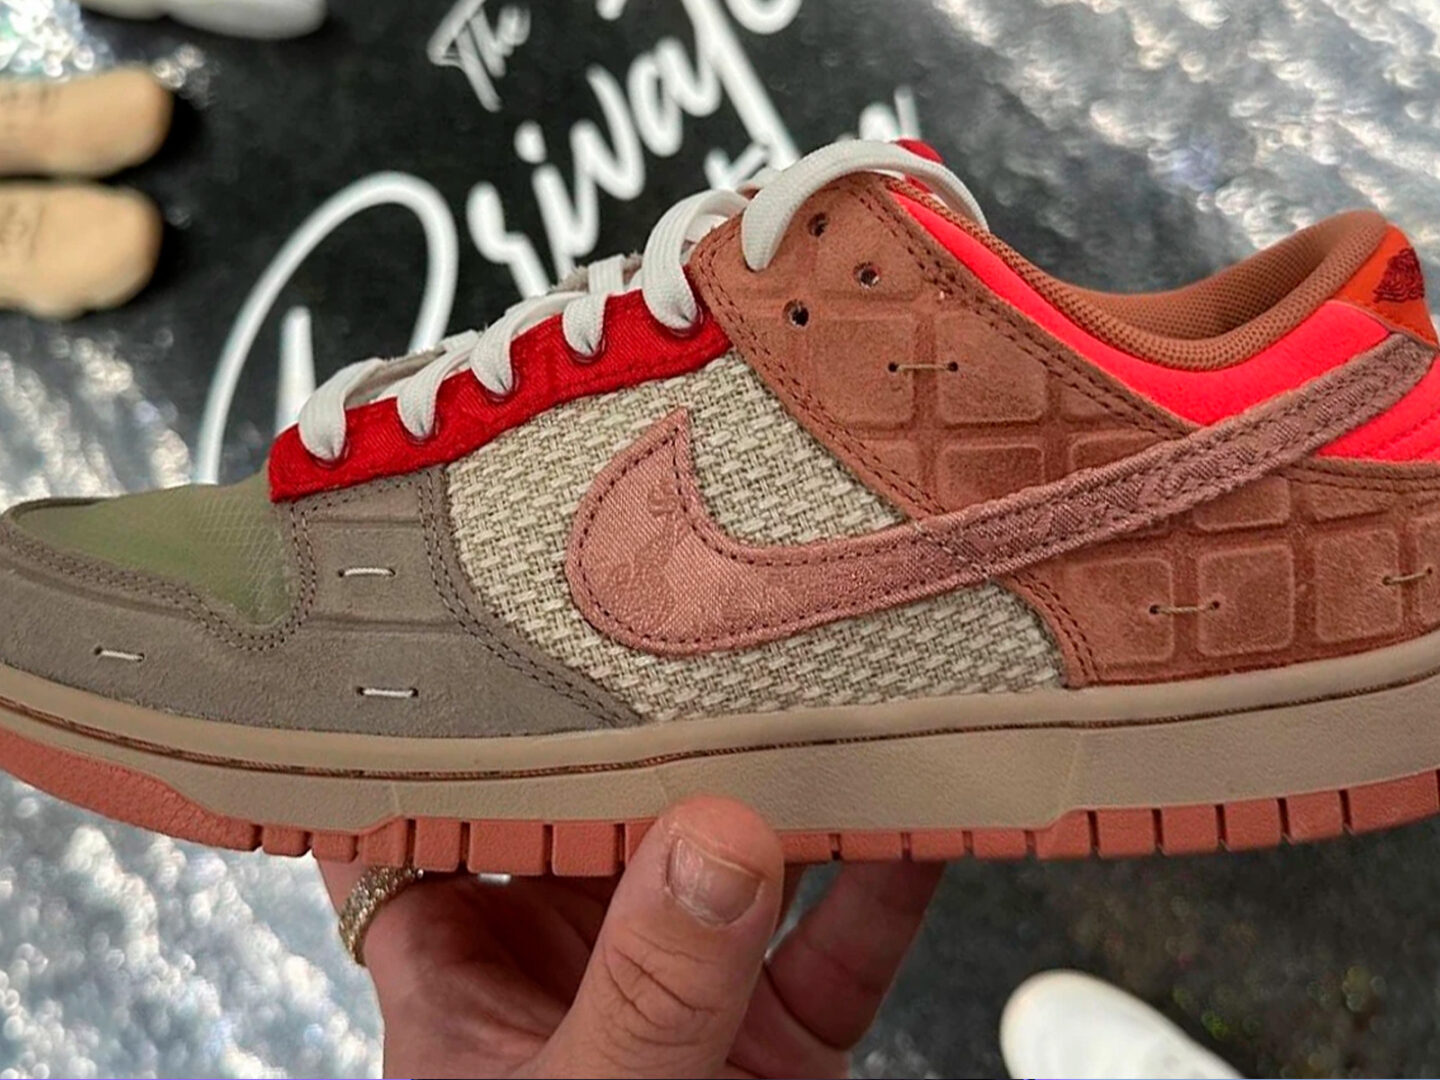 These are the images of CLOT x Nike Dunk Low “What The”